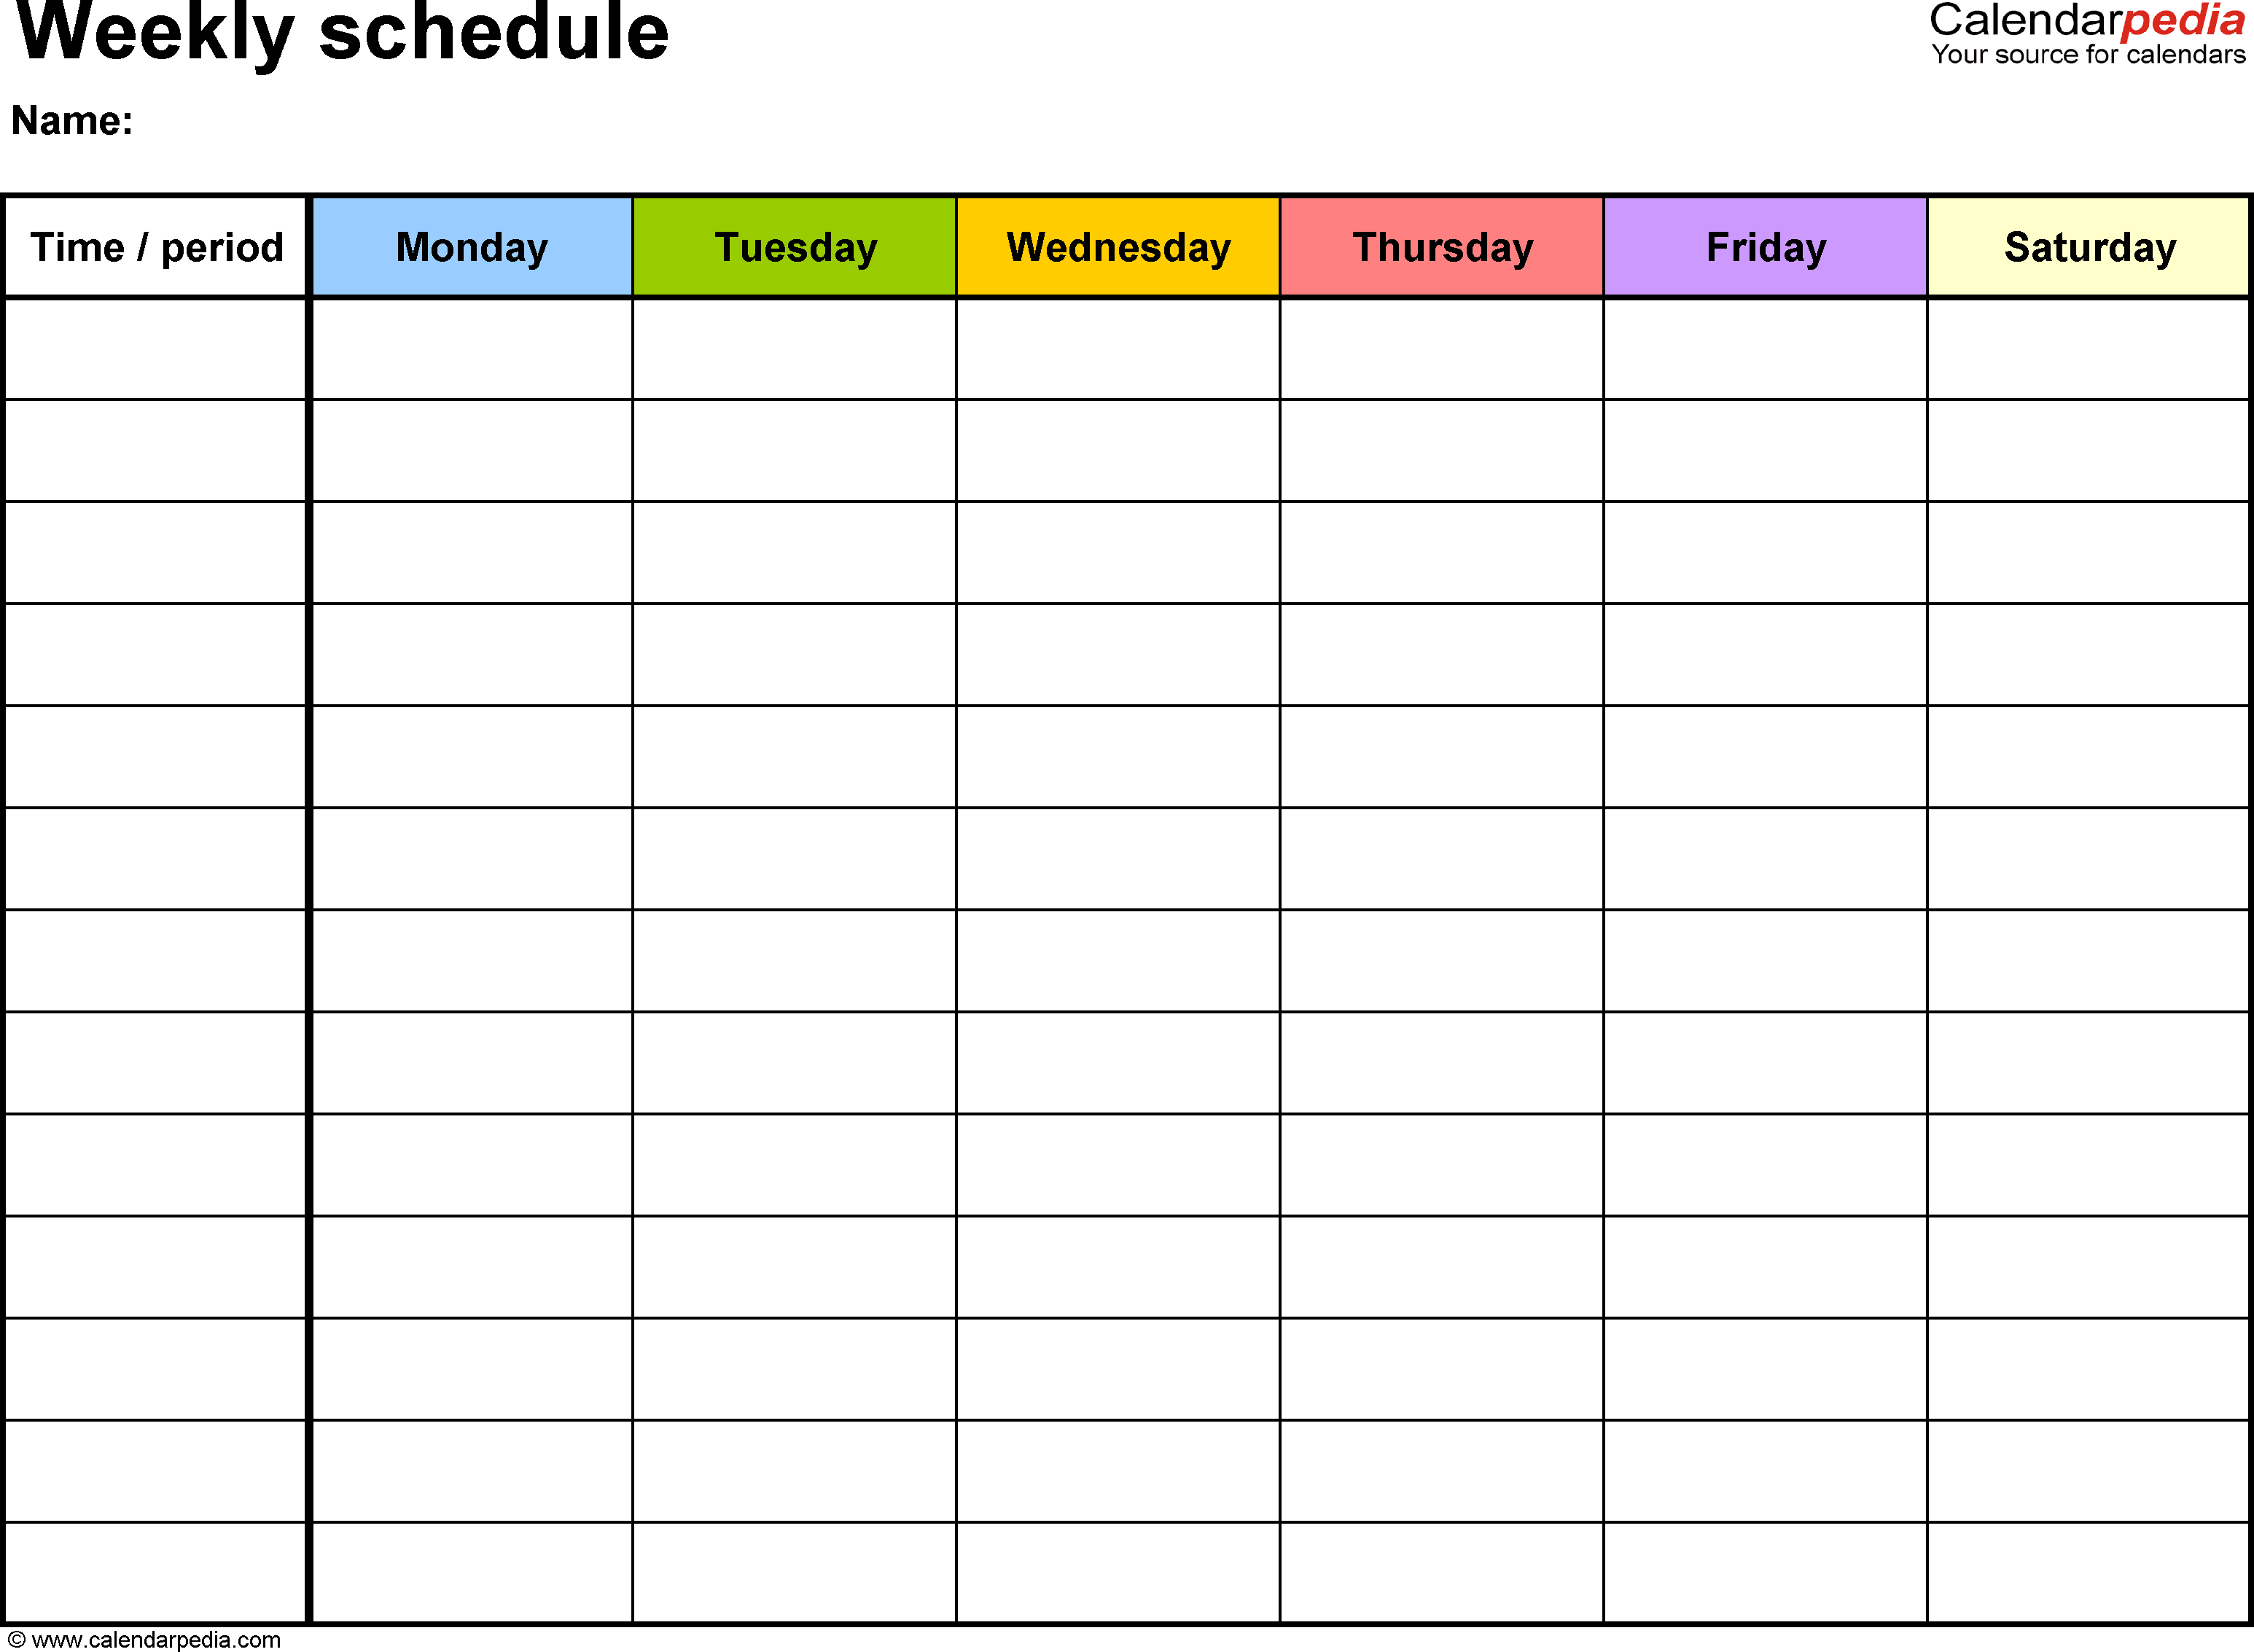 Free Weekly Schedule Templates For Word  18 Templates pertaining to 7 Day Weekly Calendar Template